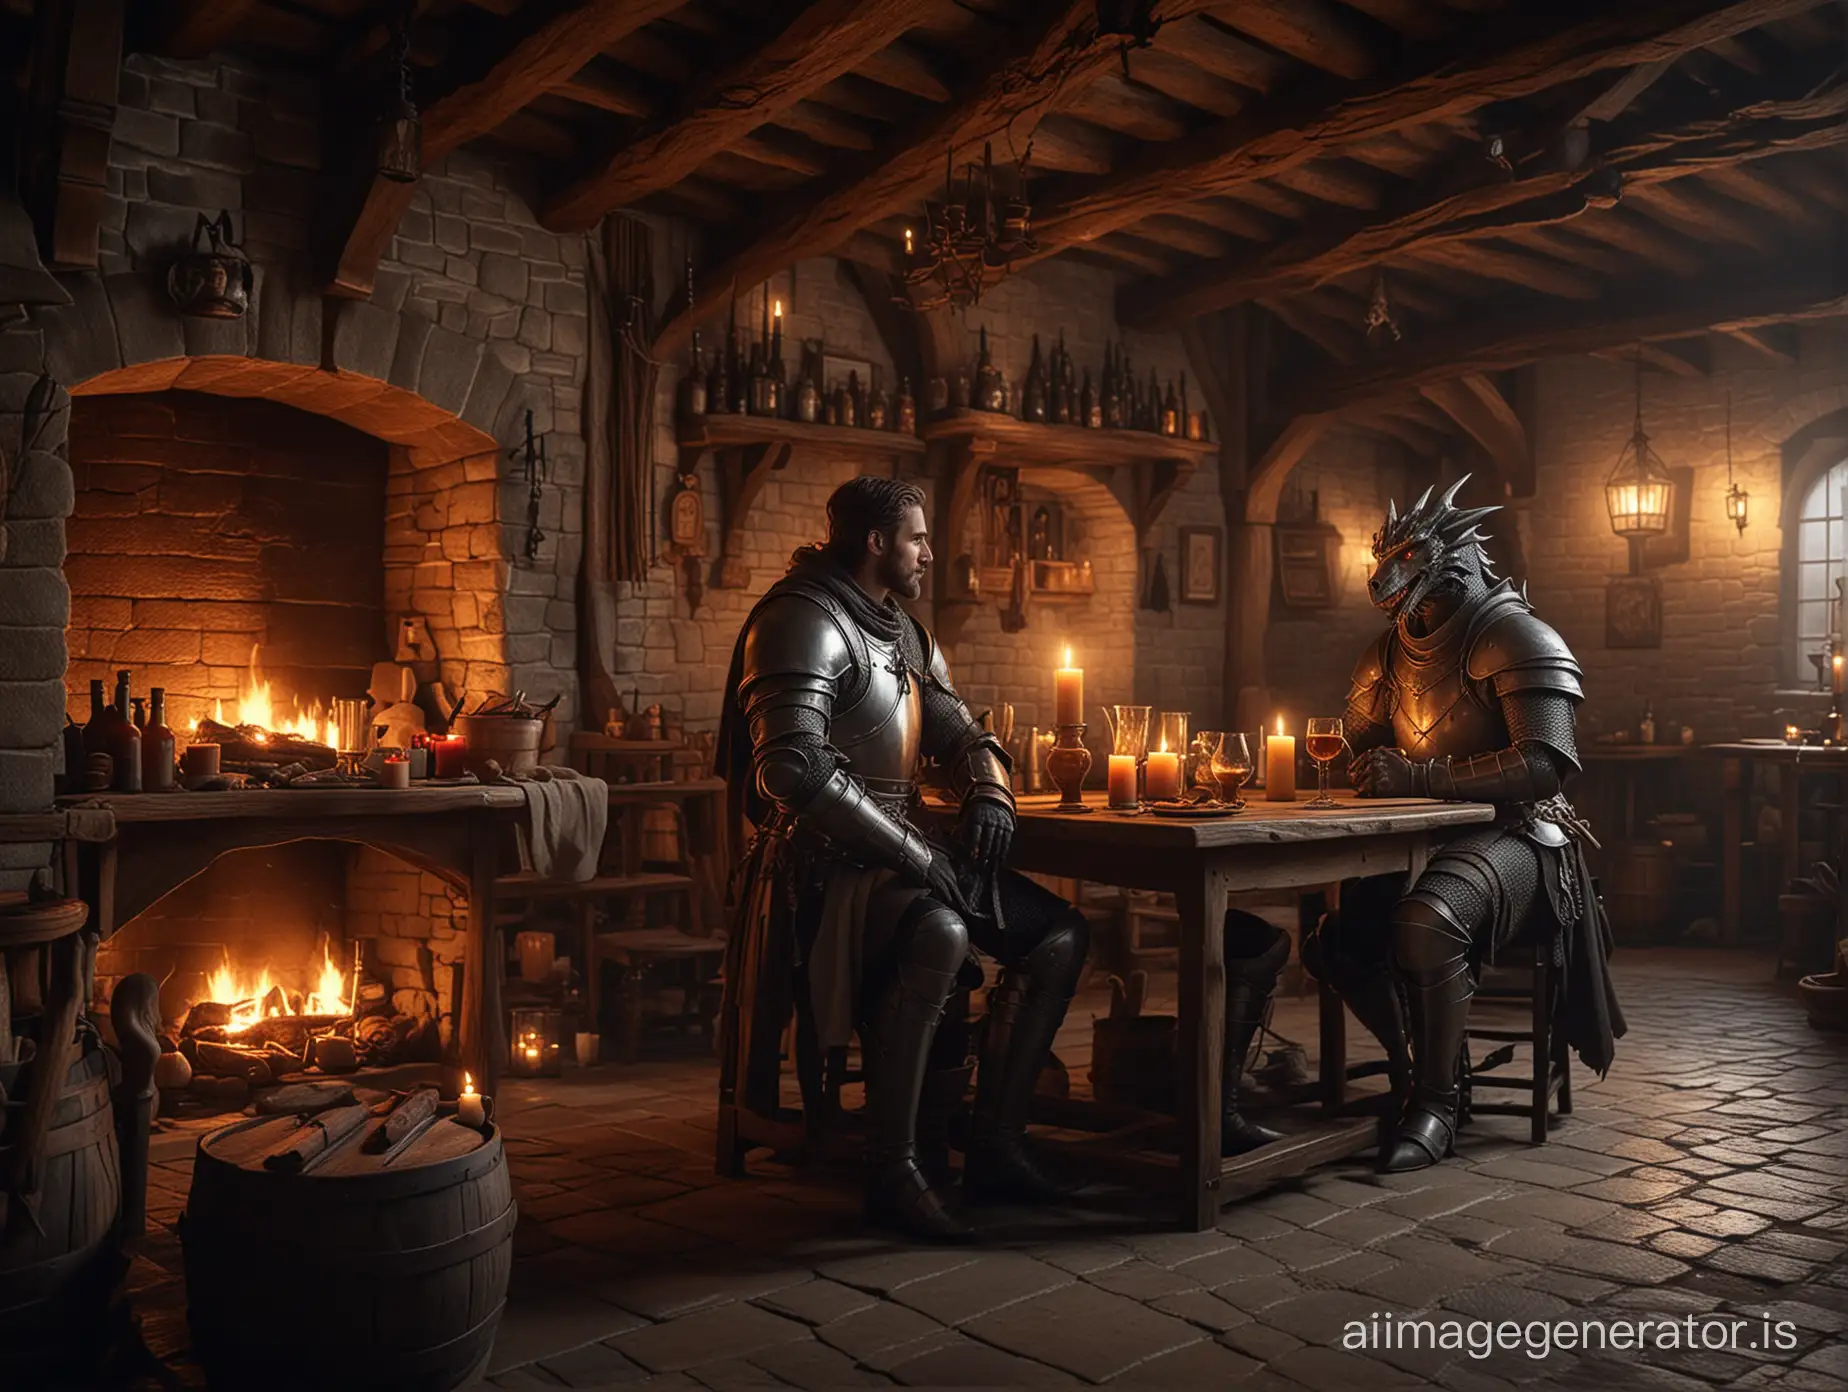 Knight-and-Dragon-Sharing-Ale-in-a-Cozy-Medieval-Tavern-at-Night